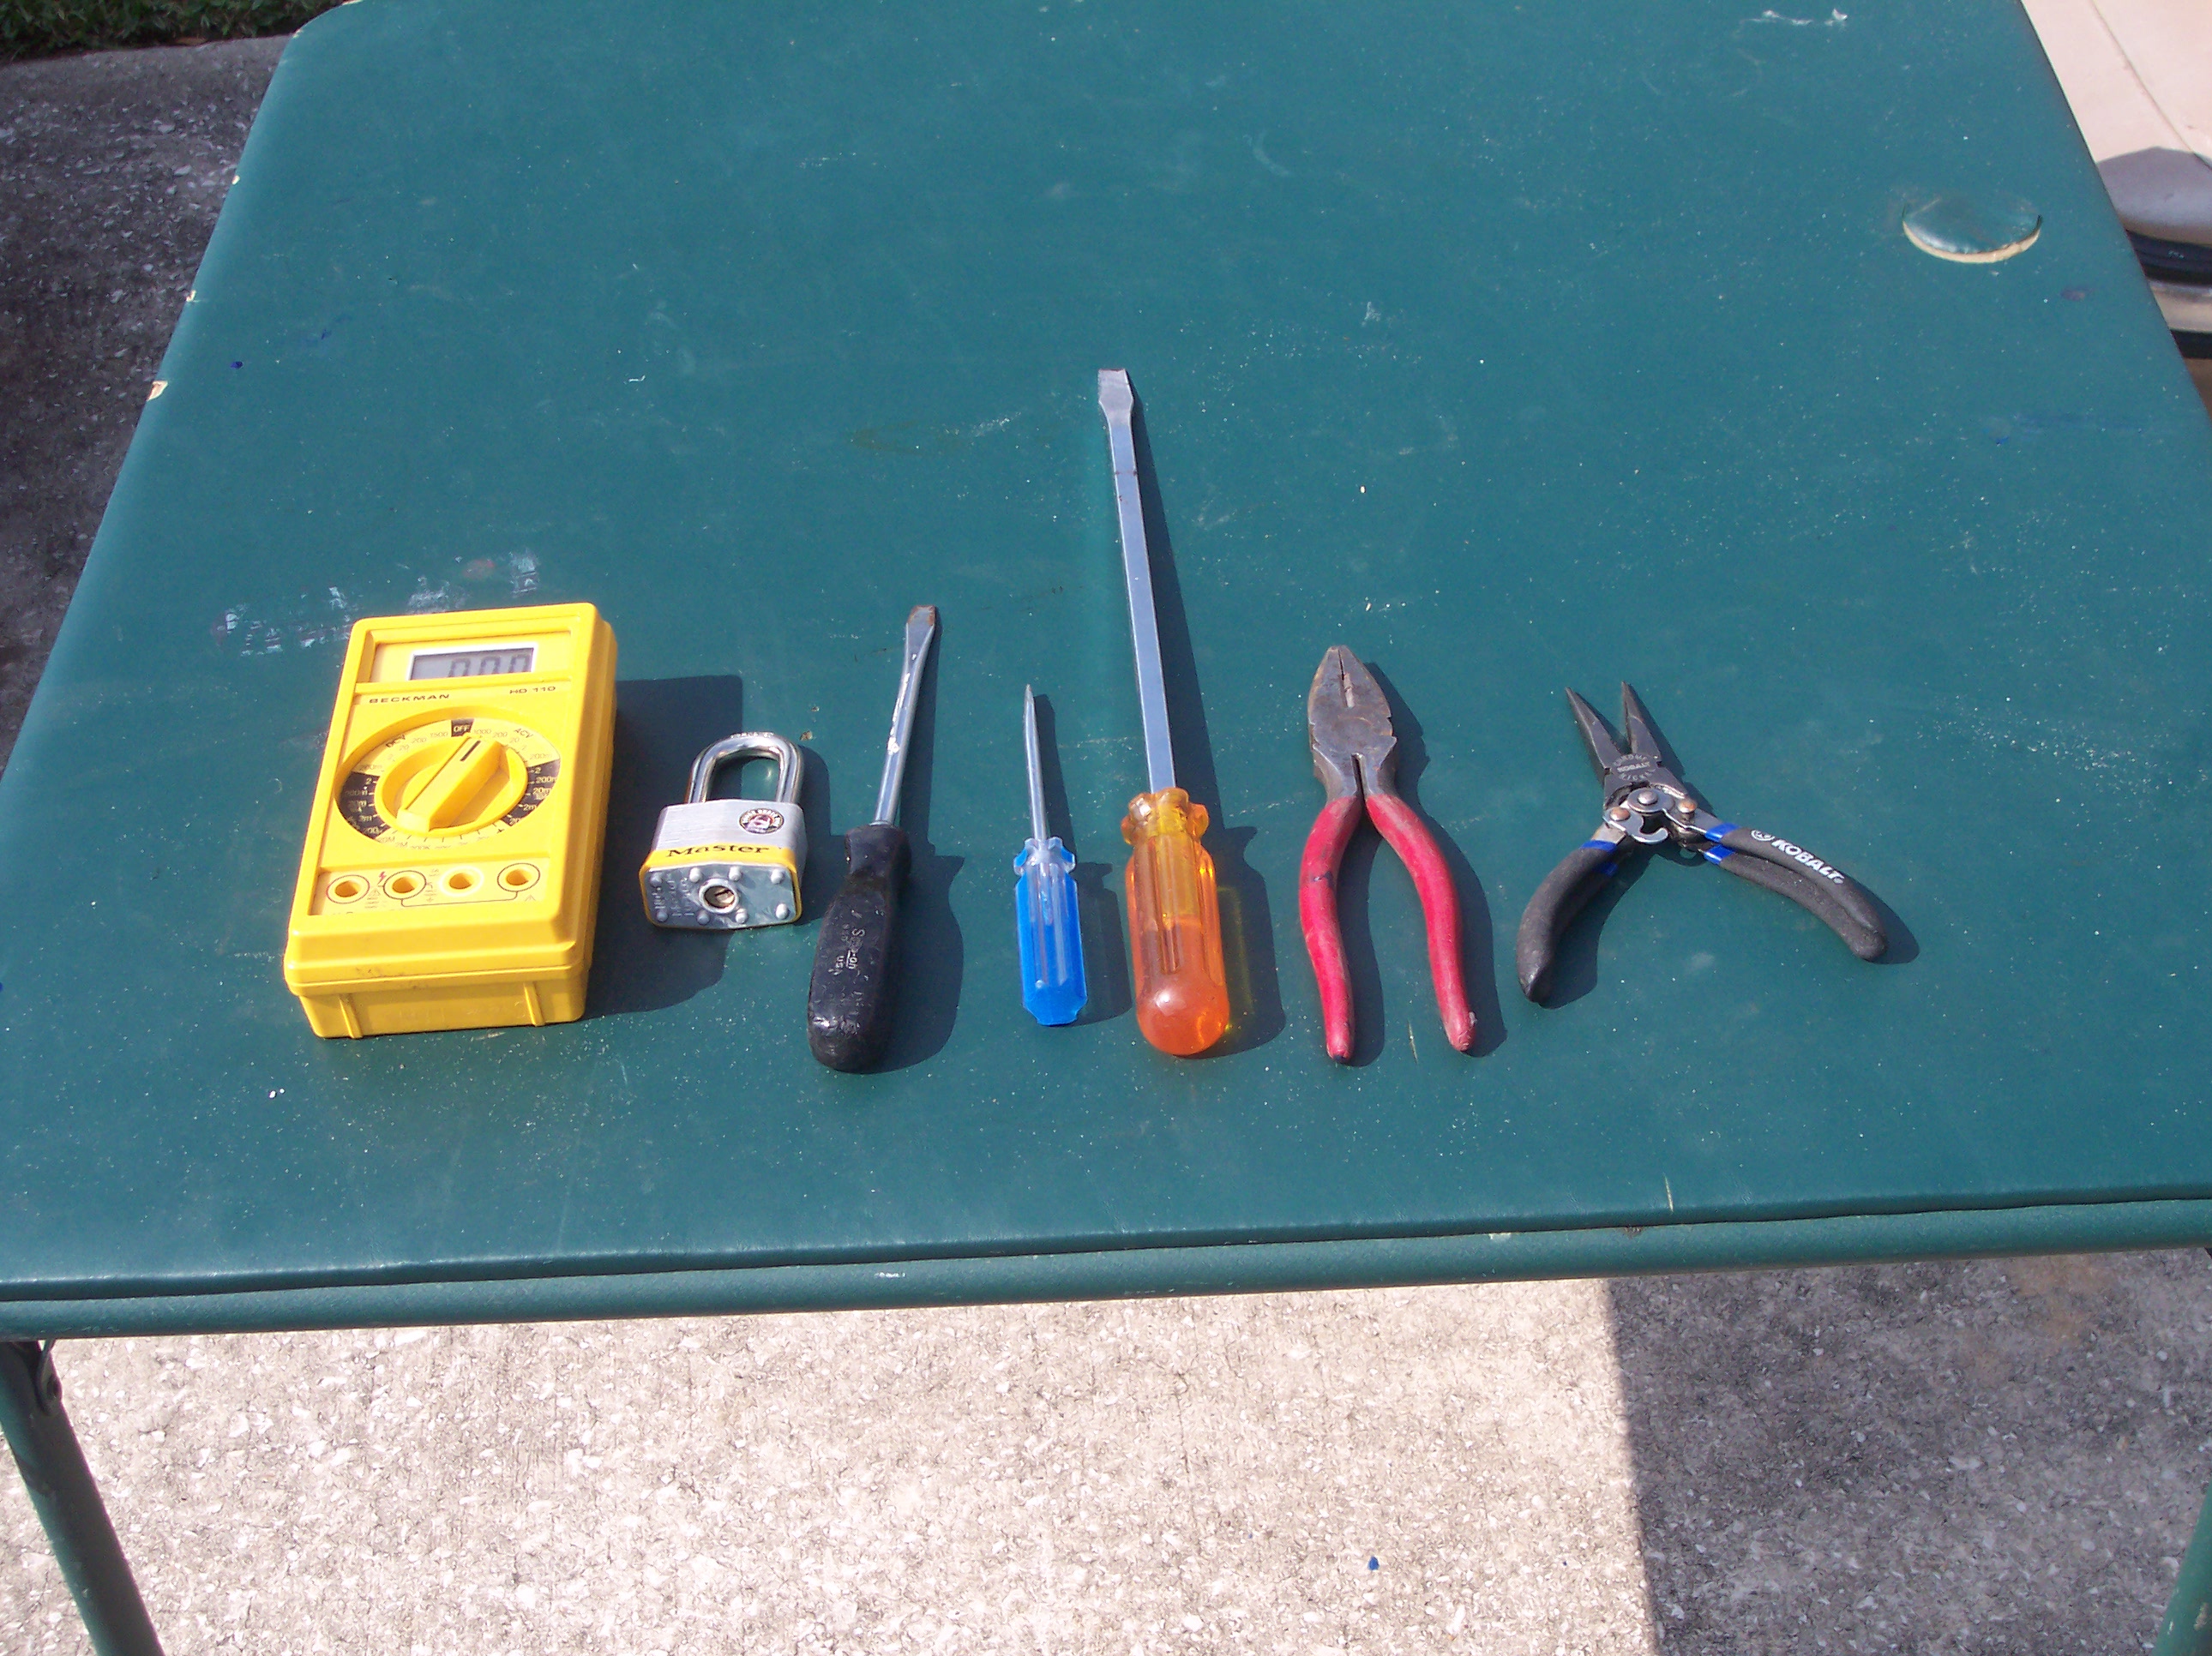 tools for electricians